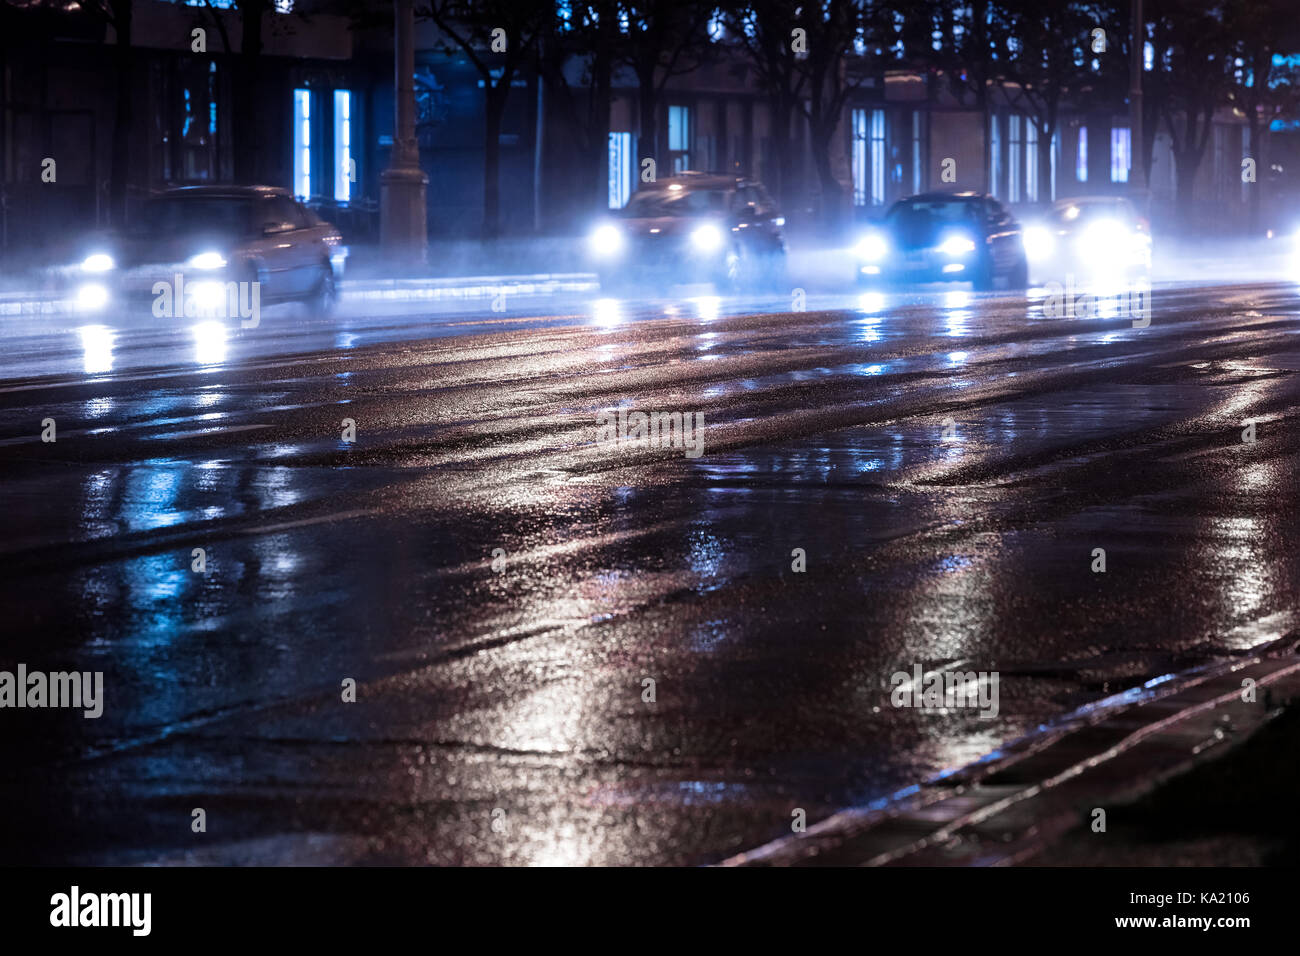 city traffic at night. cars driving on wet road after rain. Stock Photo